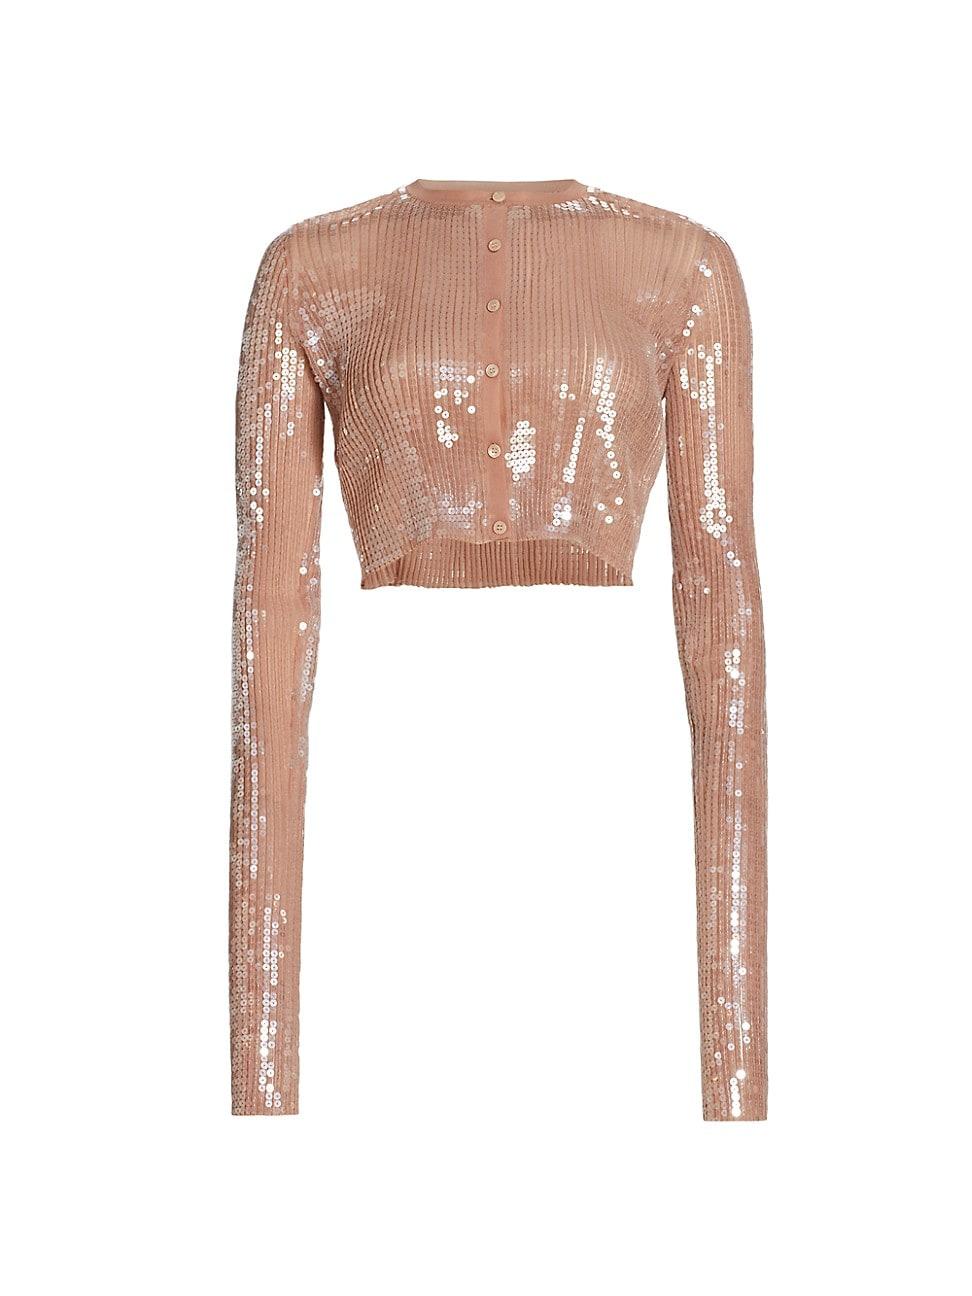 Alexander Wang Sequin-embellished Cropped Cardigan in White | Lyst